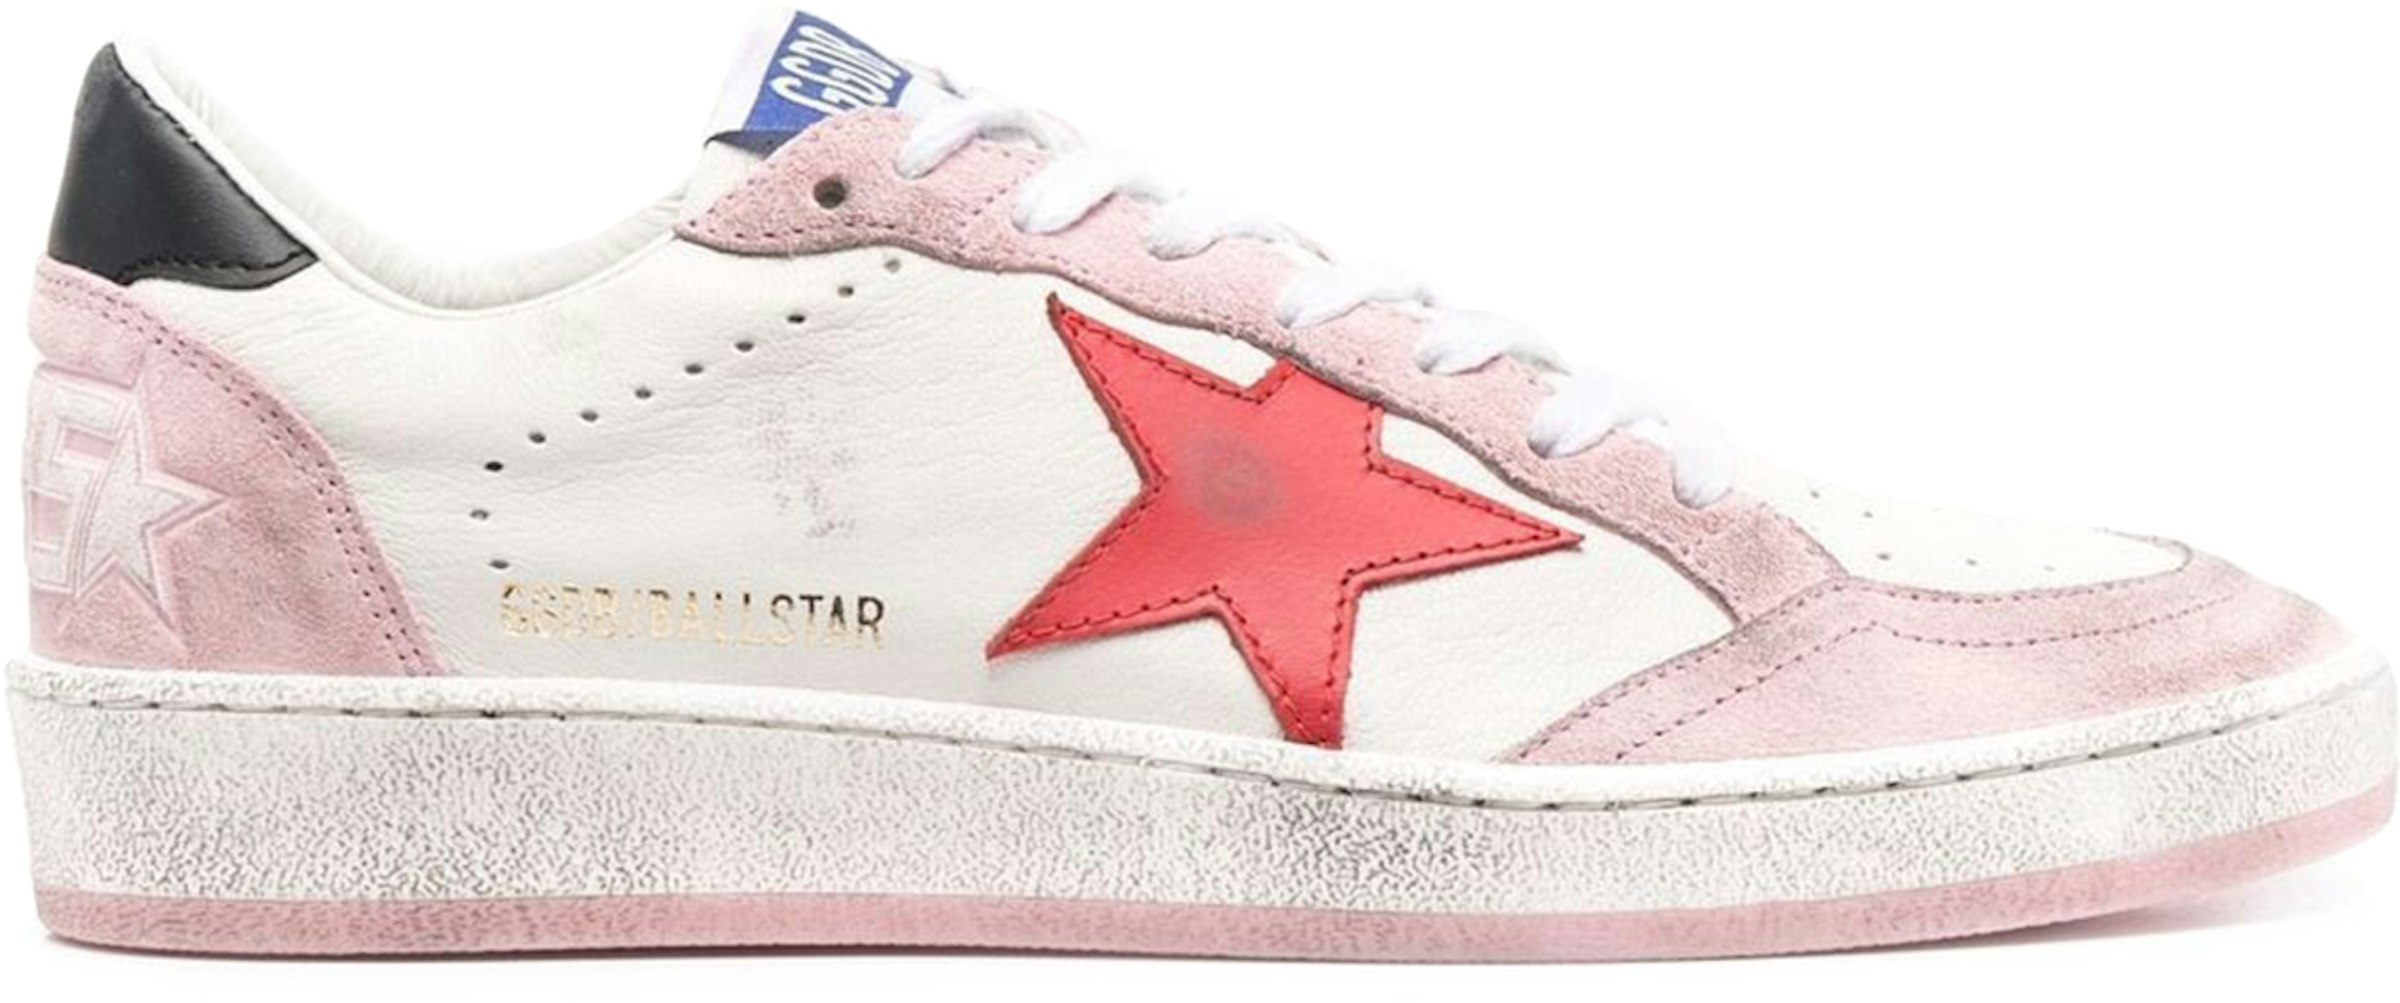 Golden Goose Ball-Star low Red (Women's) GWF00117F00247310880 US